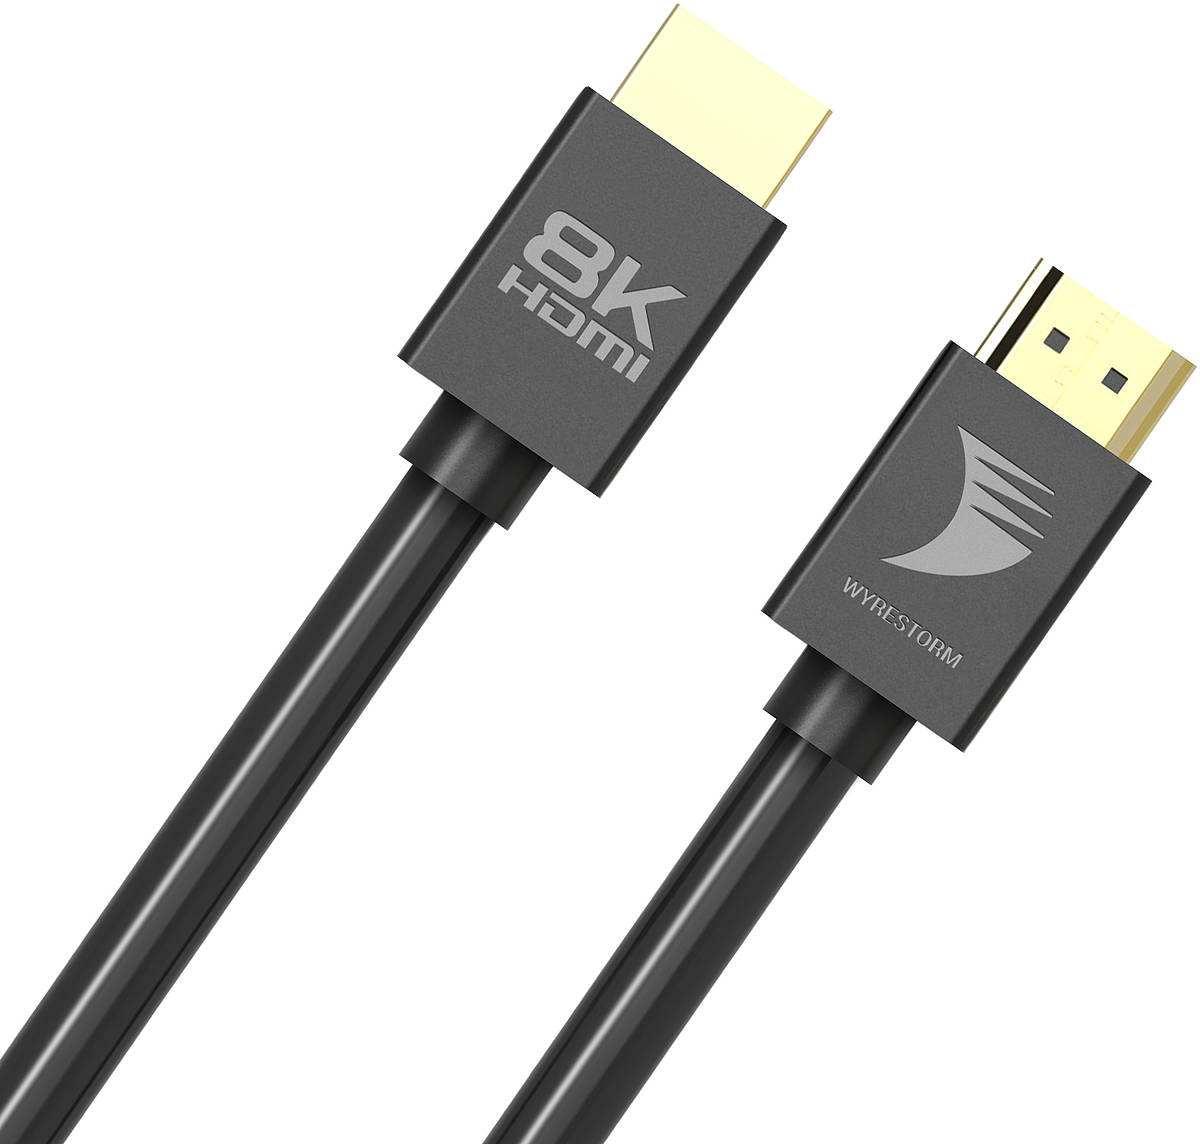 EXP-HDMI-1M-8K 1.00m WyreStorm 8K 60 HDMI 2.1 cable product image. Click to enlarge.